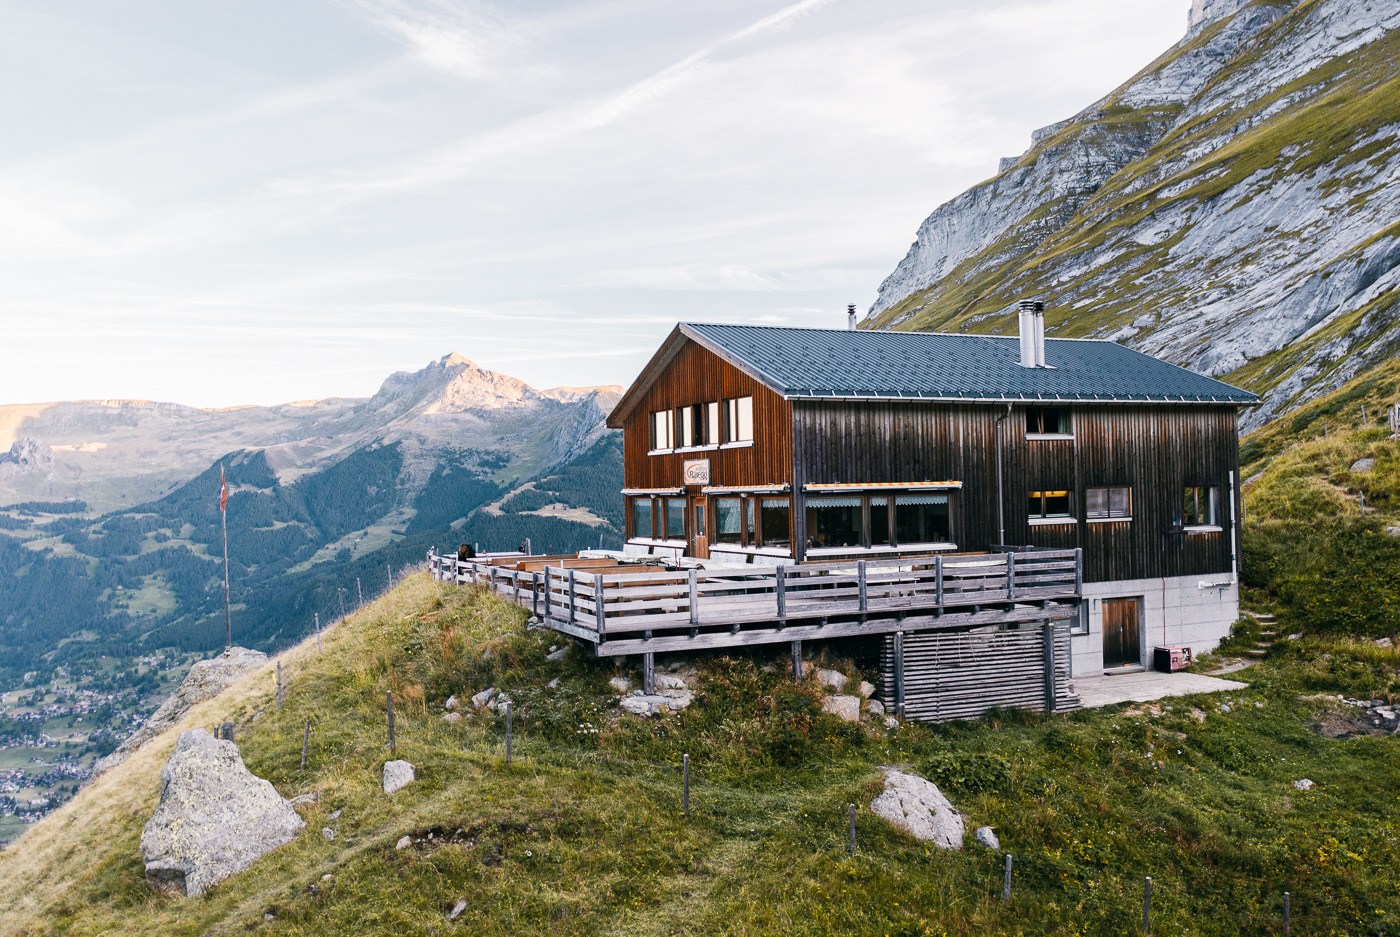 THE WEEKLY #167: SWISS MOUNTAIN HUTS